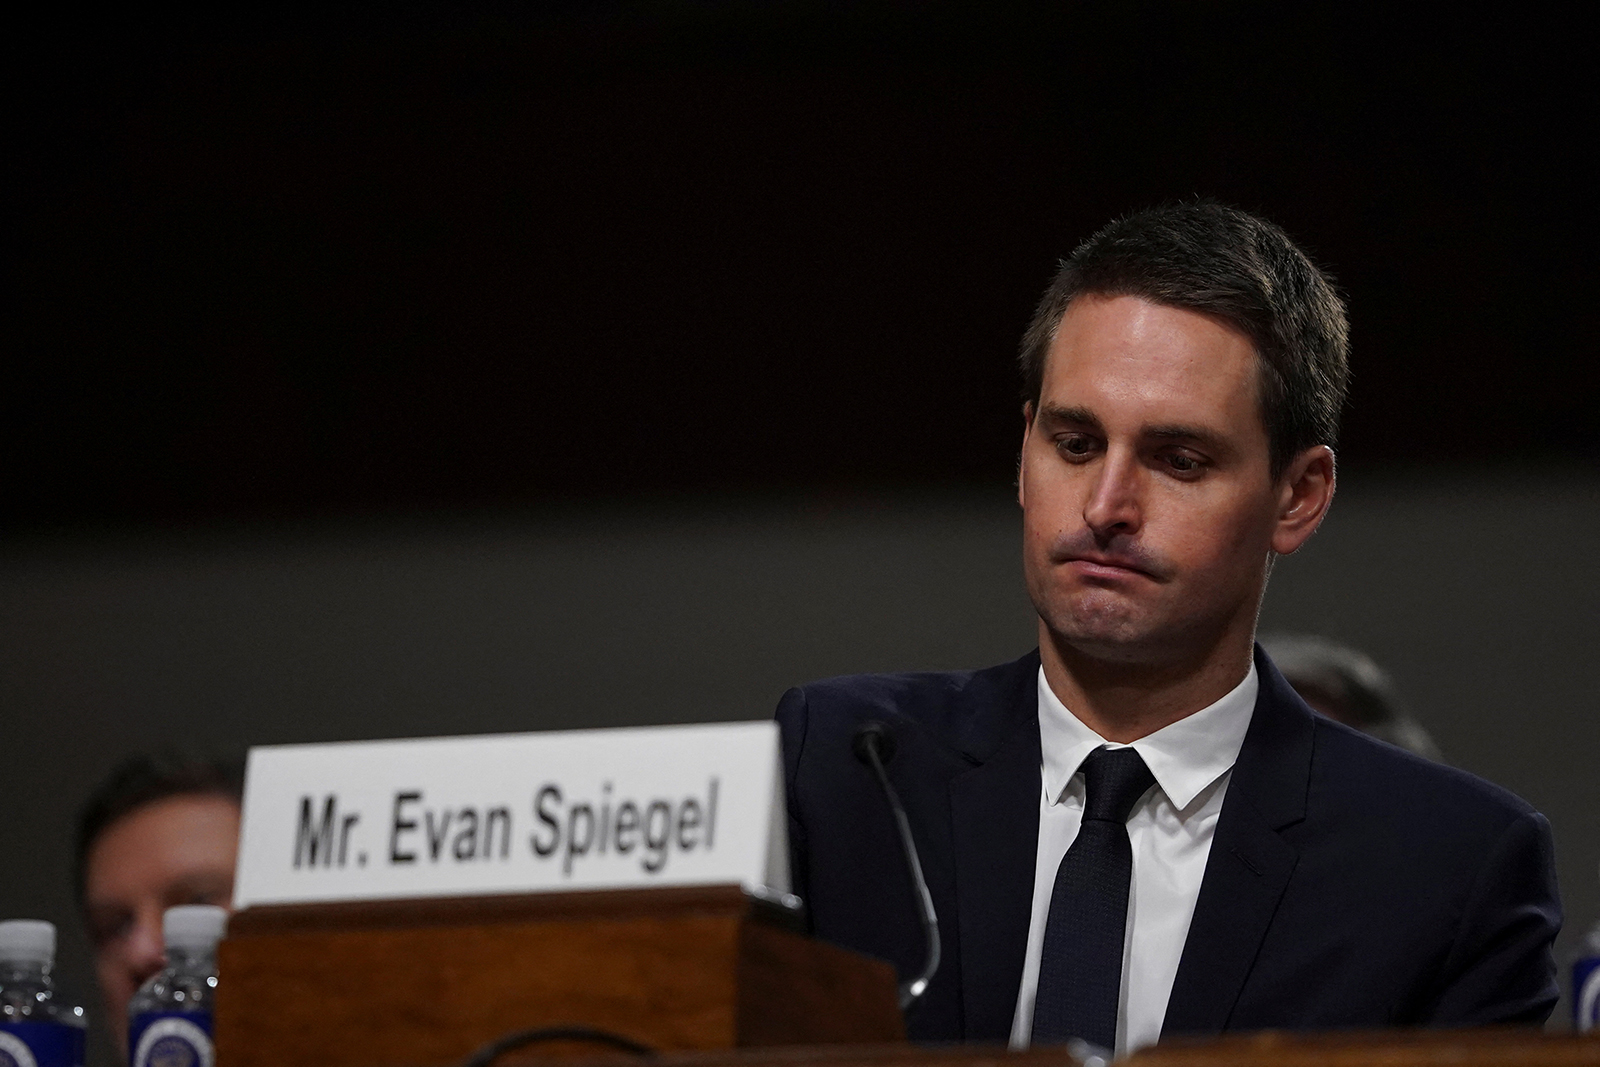 Co-founder and CEO of Snap Inc. Evan Spiegel during the Senate Judiciary Committee hearing on online child sexual exploitation at the U.S. Capitol, in Washington, today.